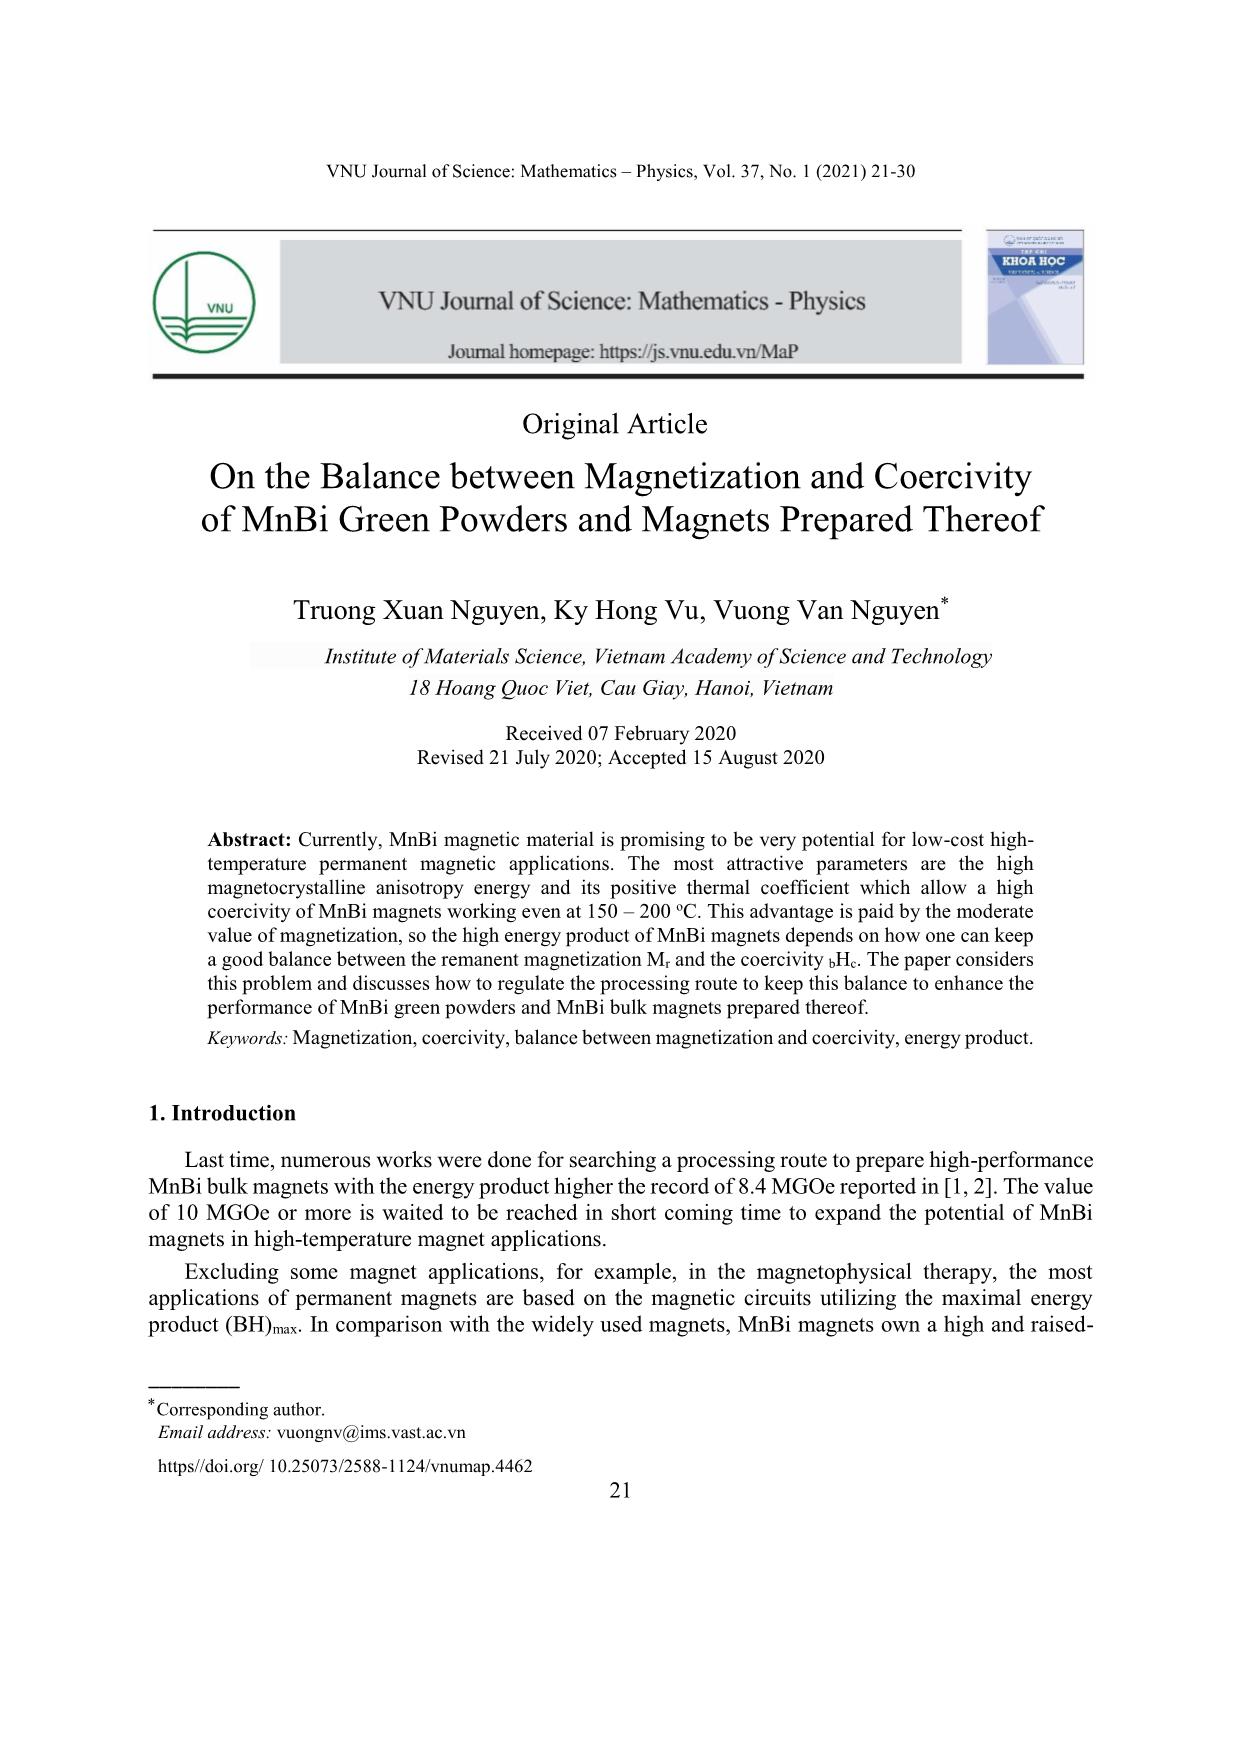 On the balance between magnetization and coercivity of mnbi green powders and magnets prepared thereof trang 1